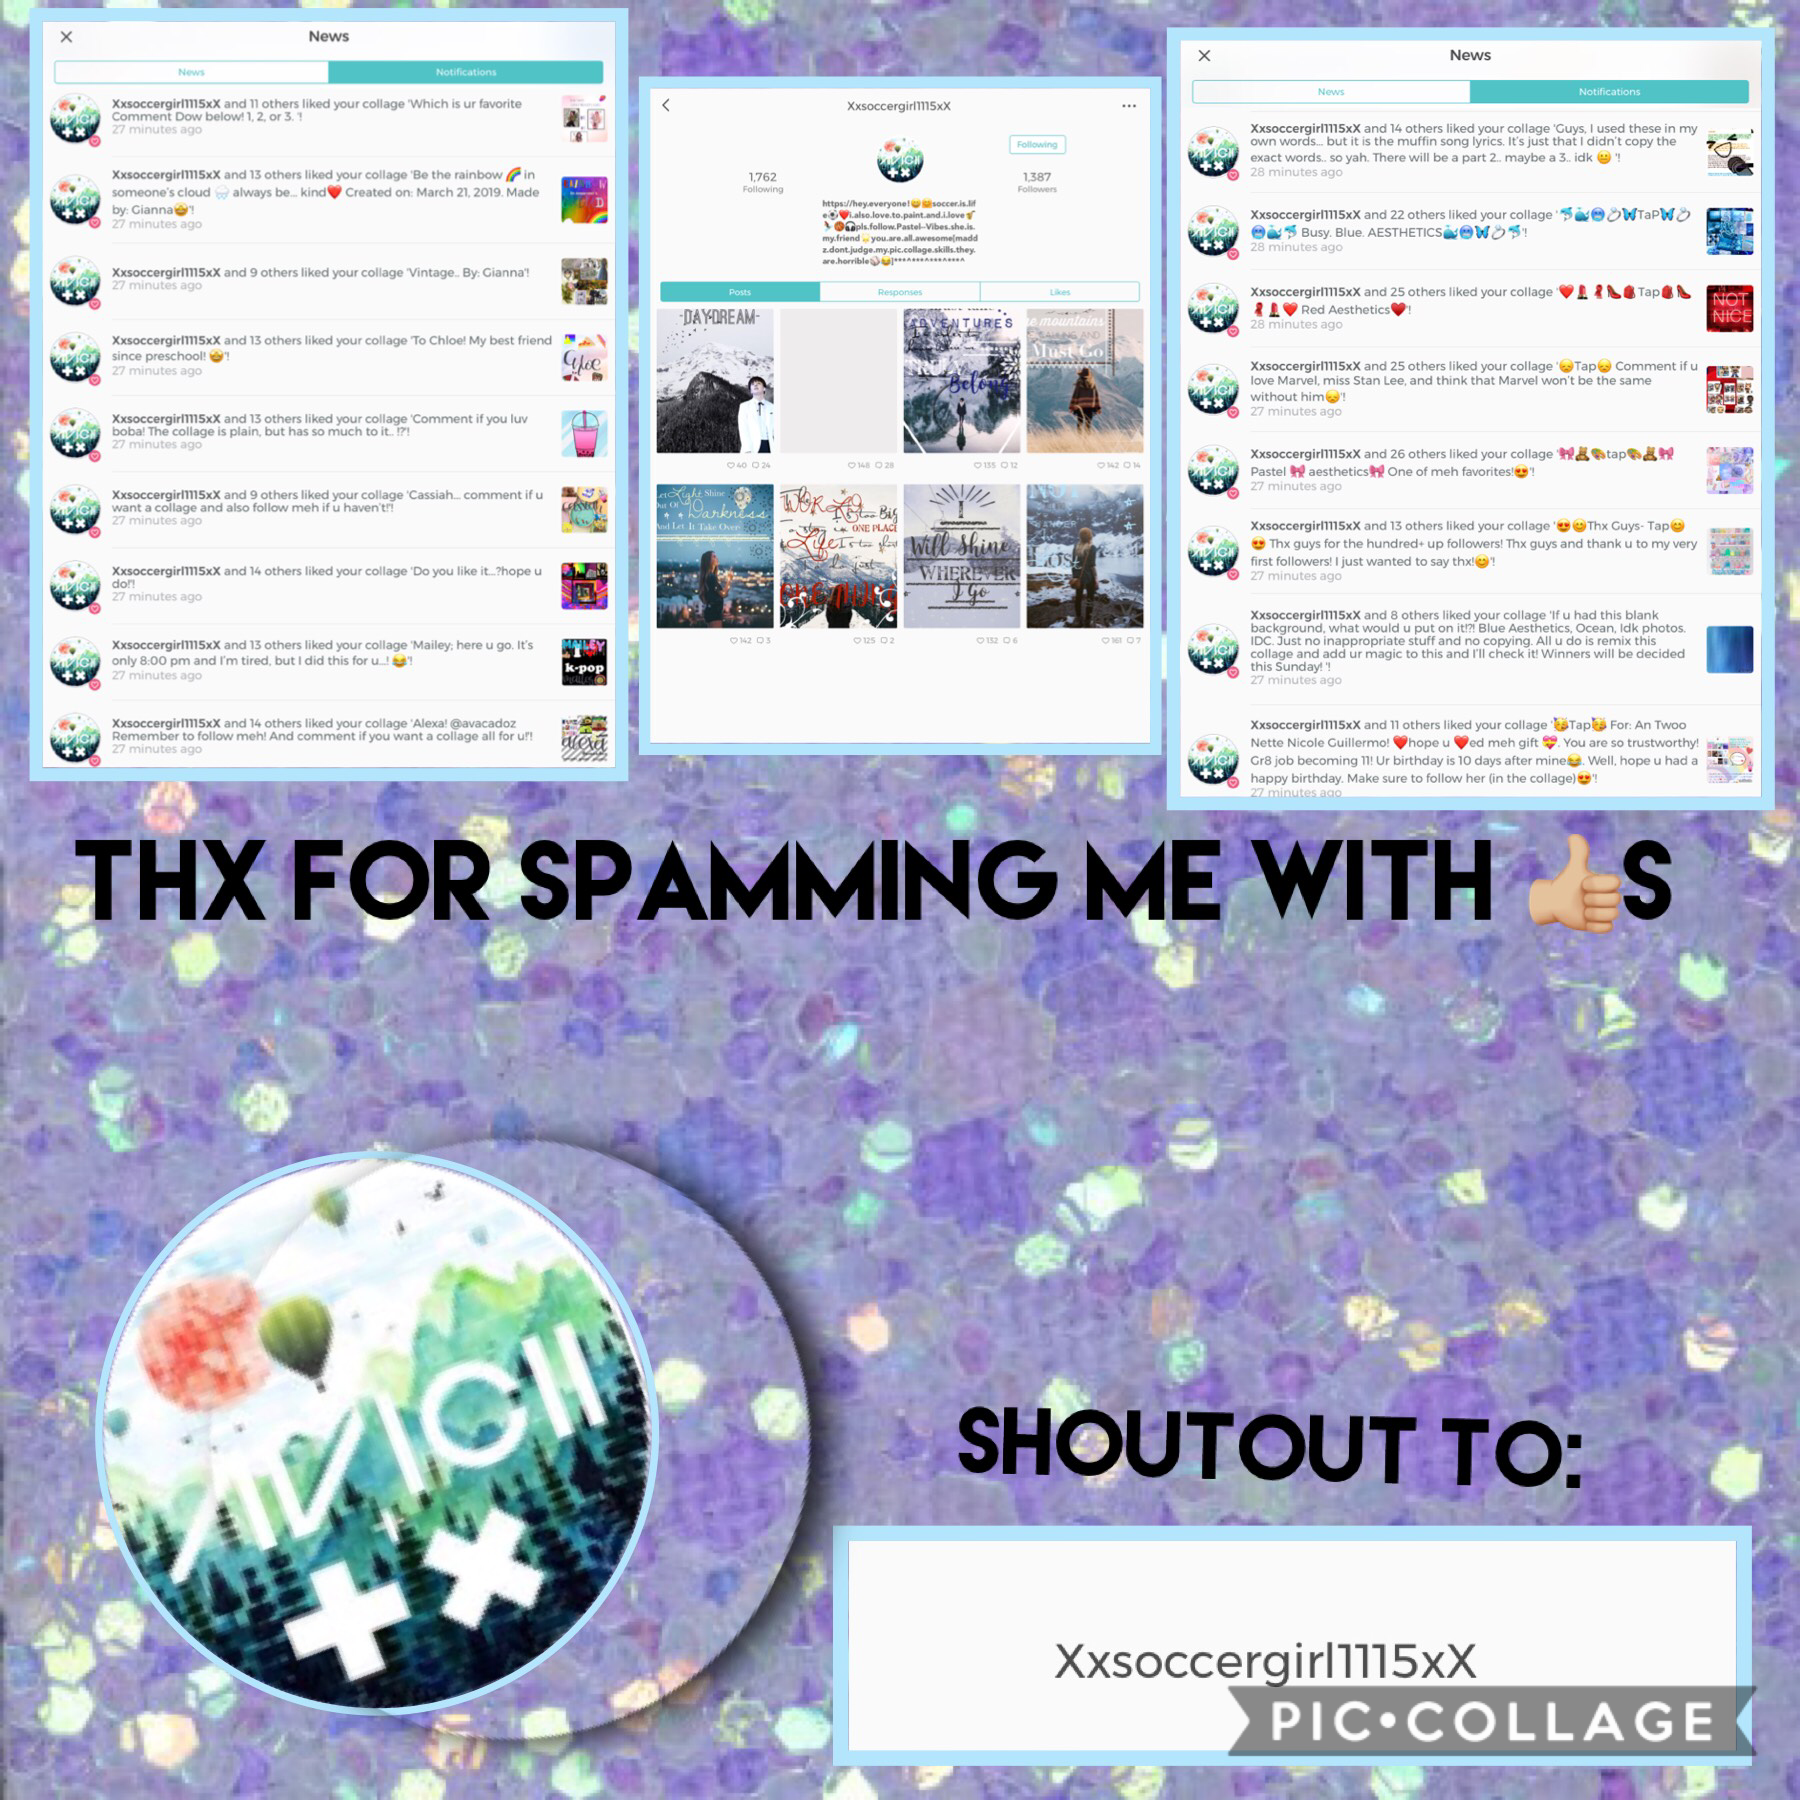 Shoutout to Xxsoccergirl1115xX! They for spamming me with 👍🏼s. I really appreciate it😁